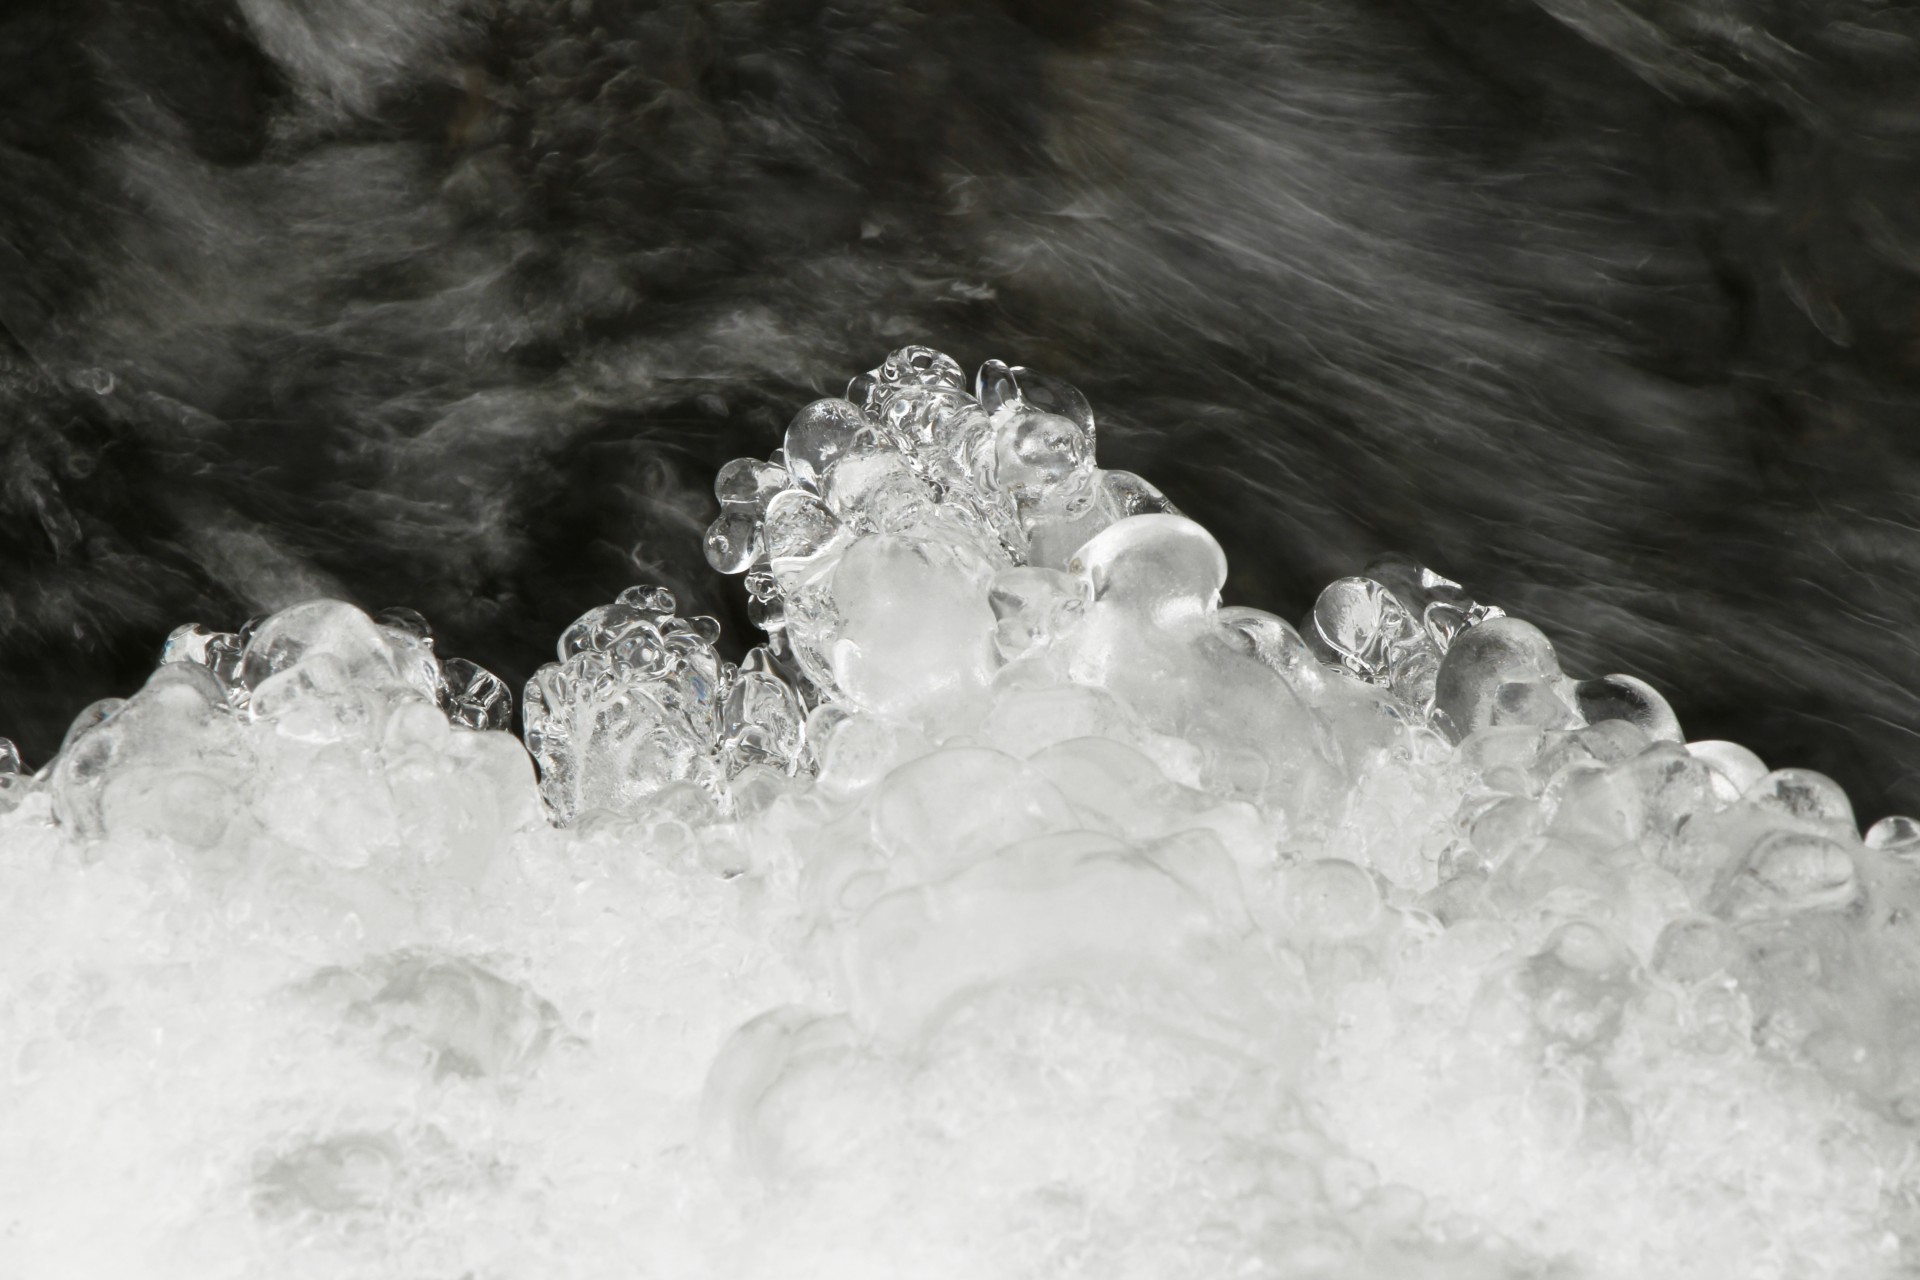 Ice over running water abstract background